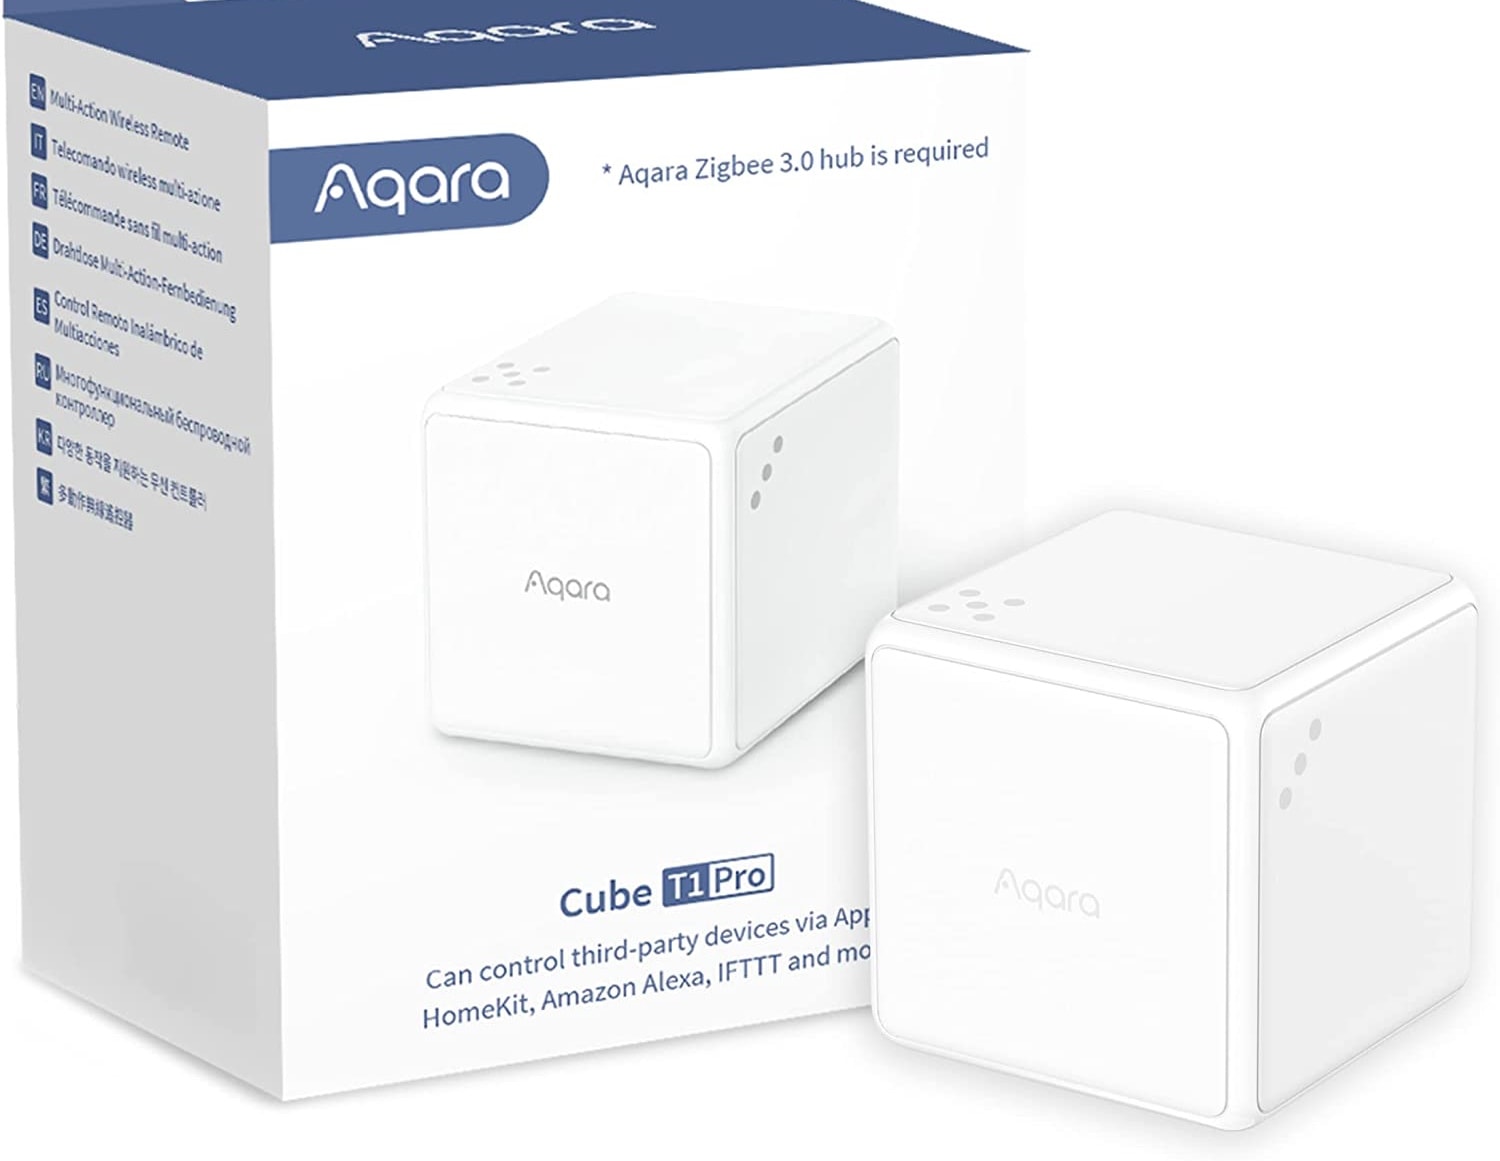 The updated Cube controller now works with HomeKit and will work with the Matter smart-home automation standard.